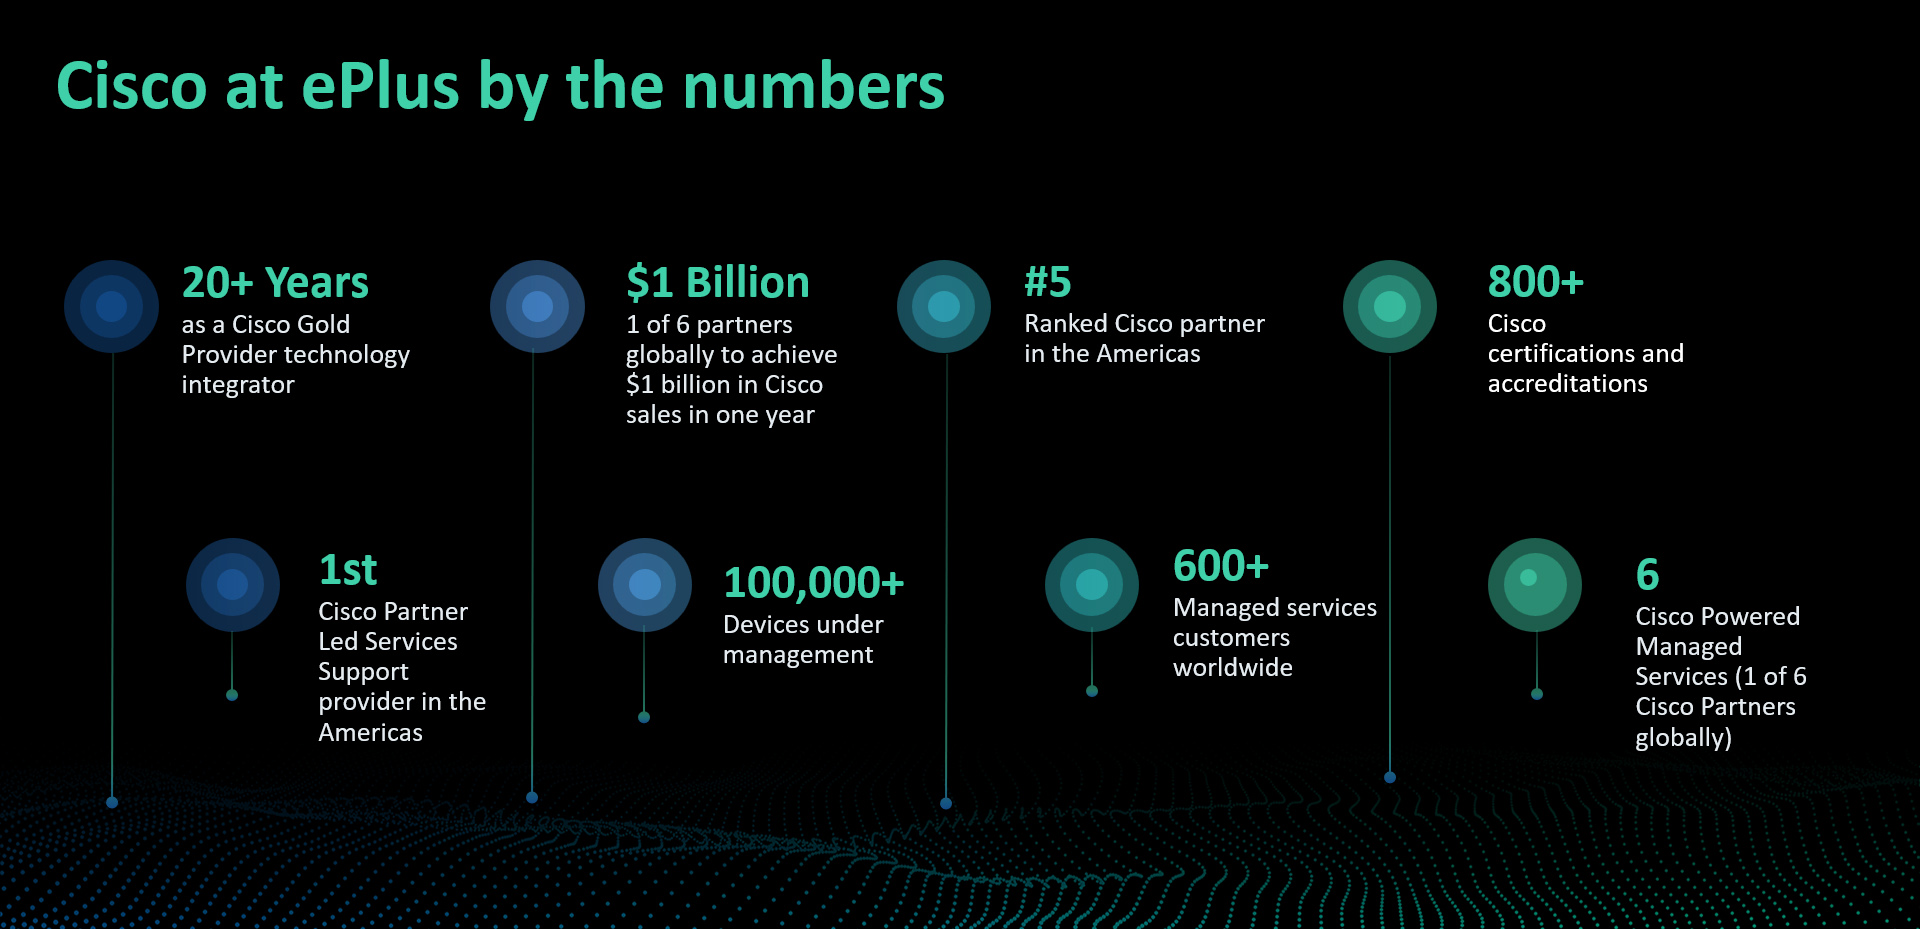 Cisco at ePlus by the numbers